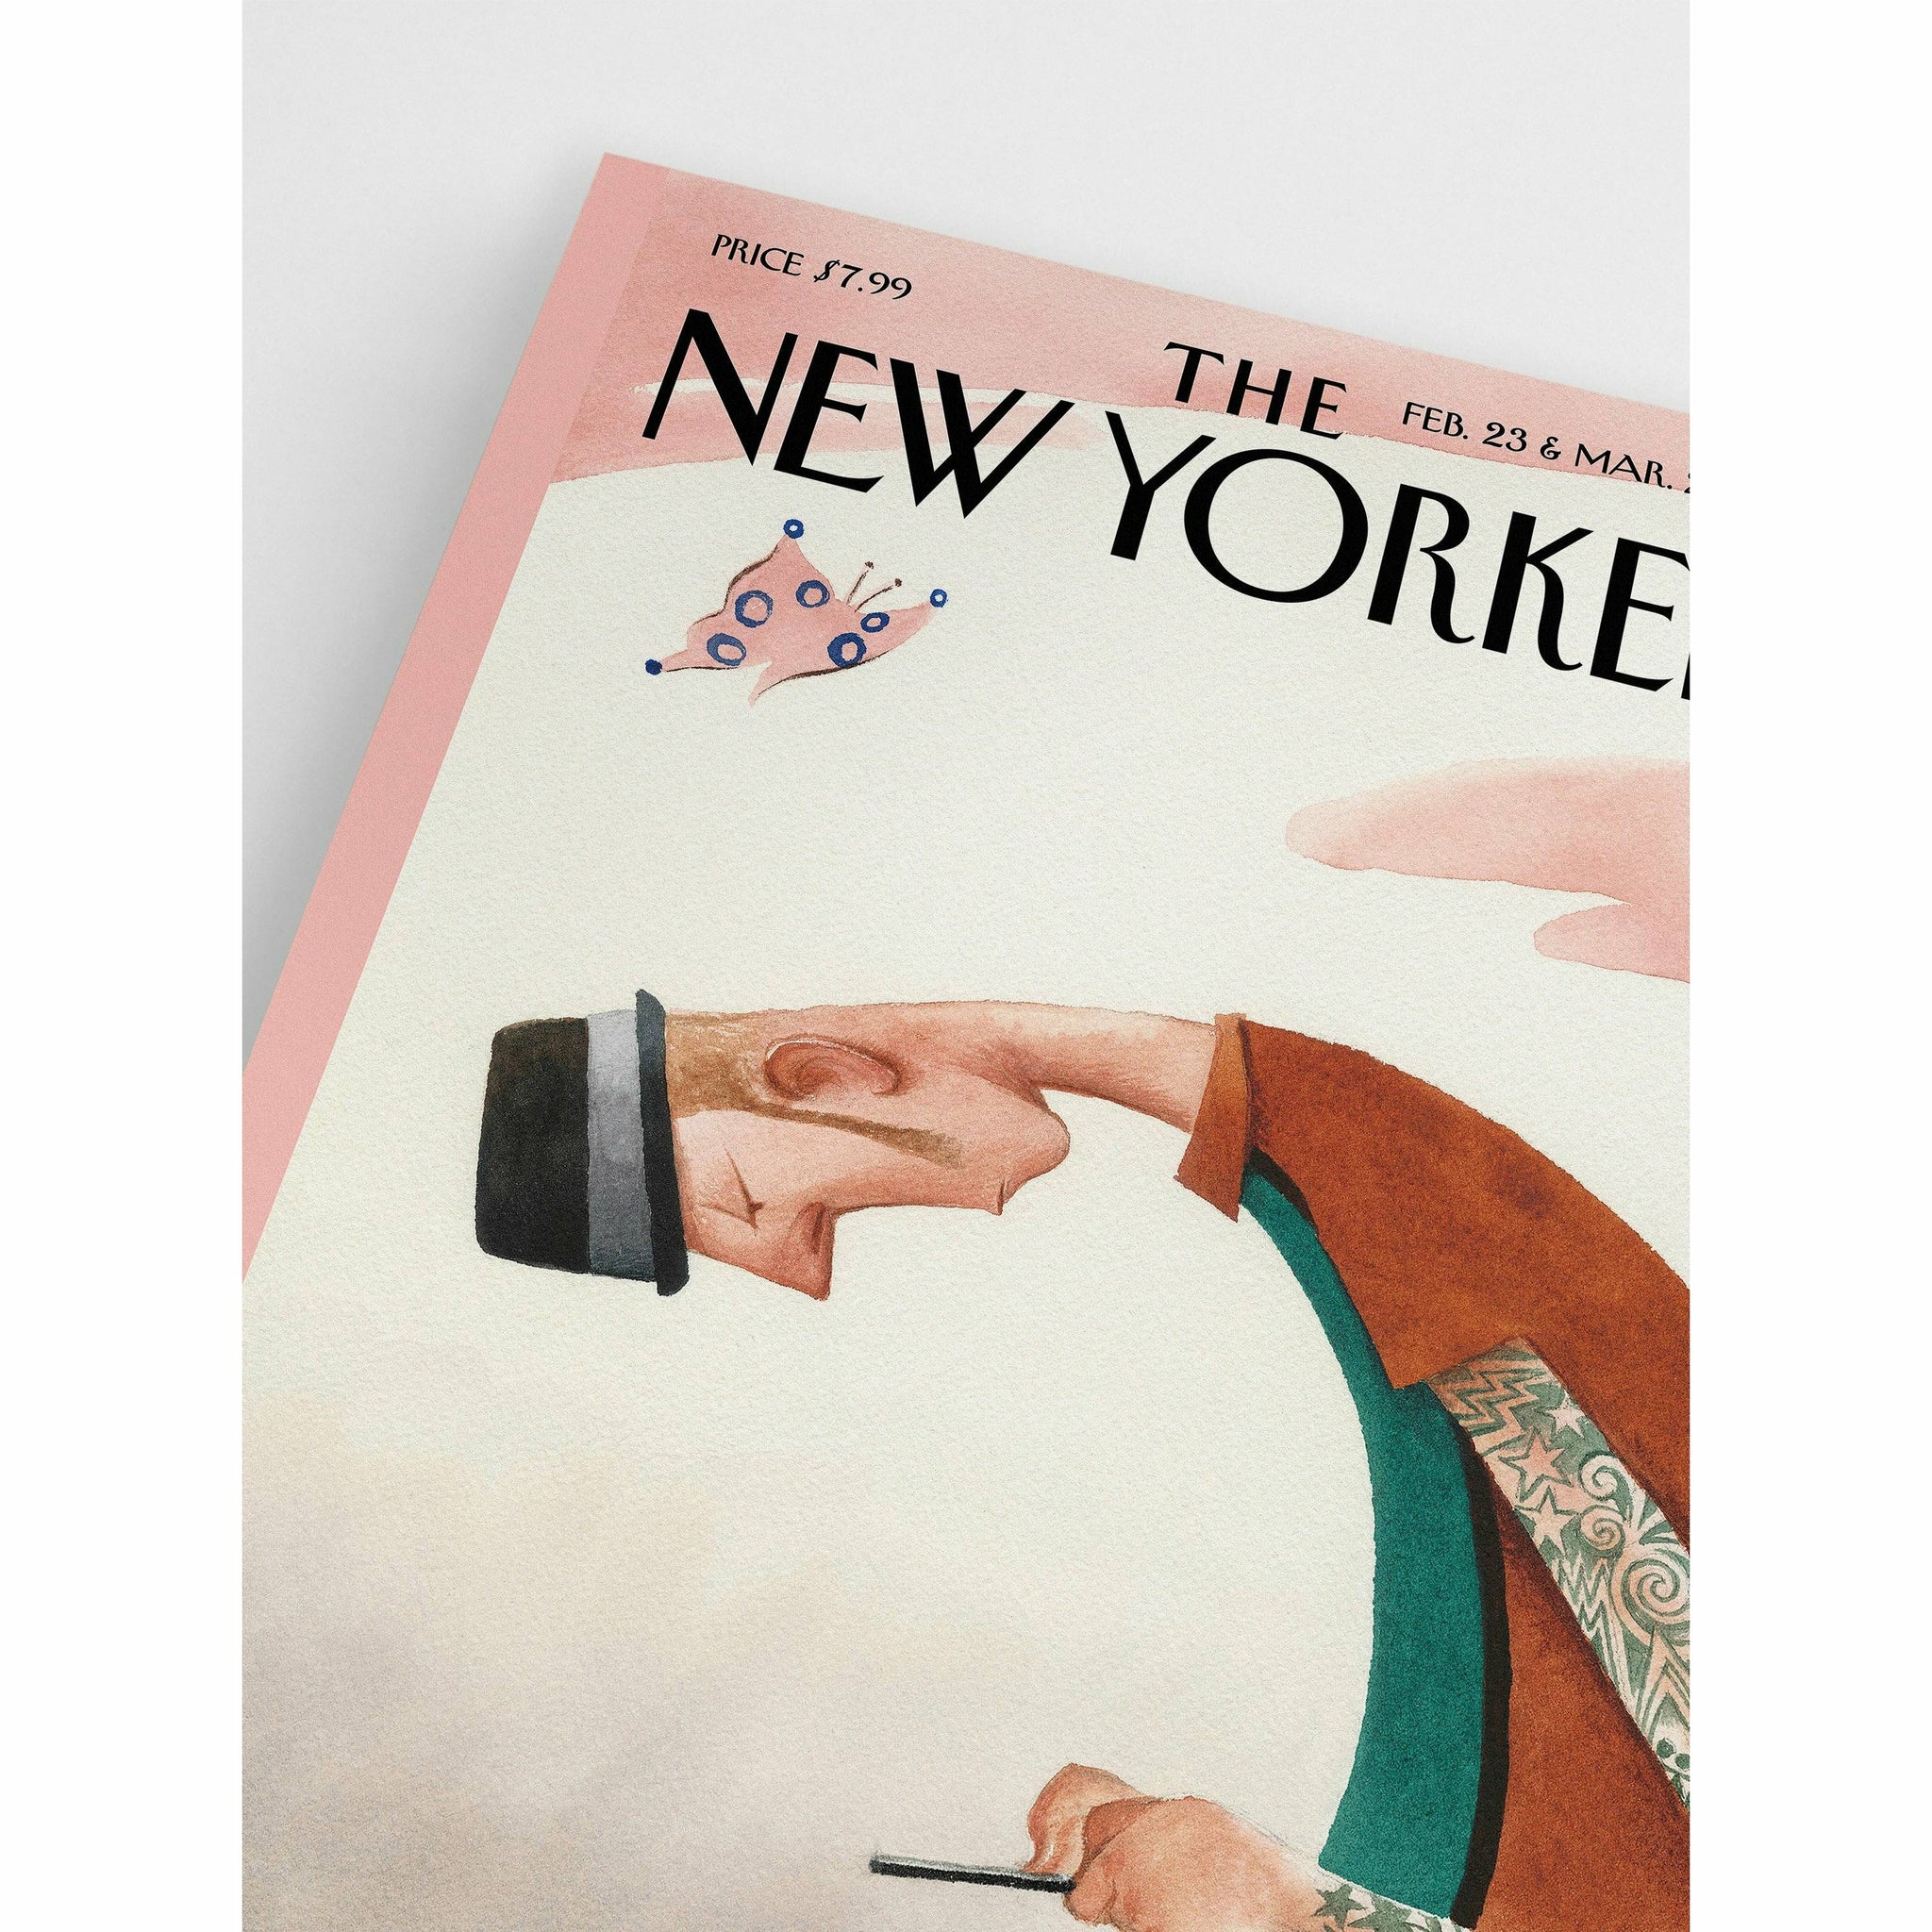 The New Yorker Poster 2015